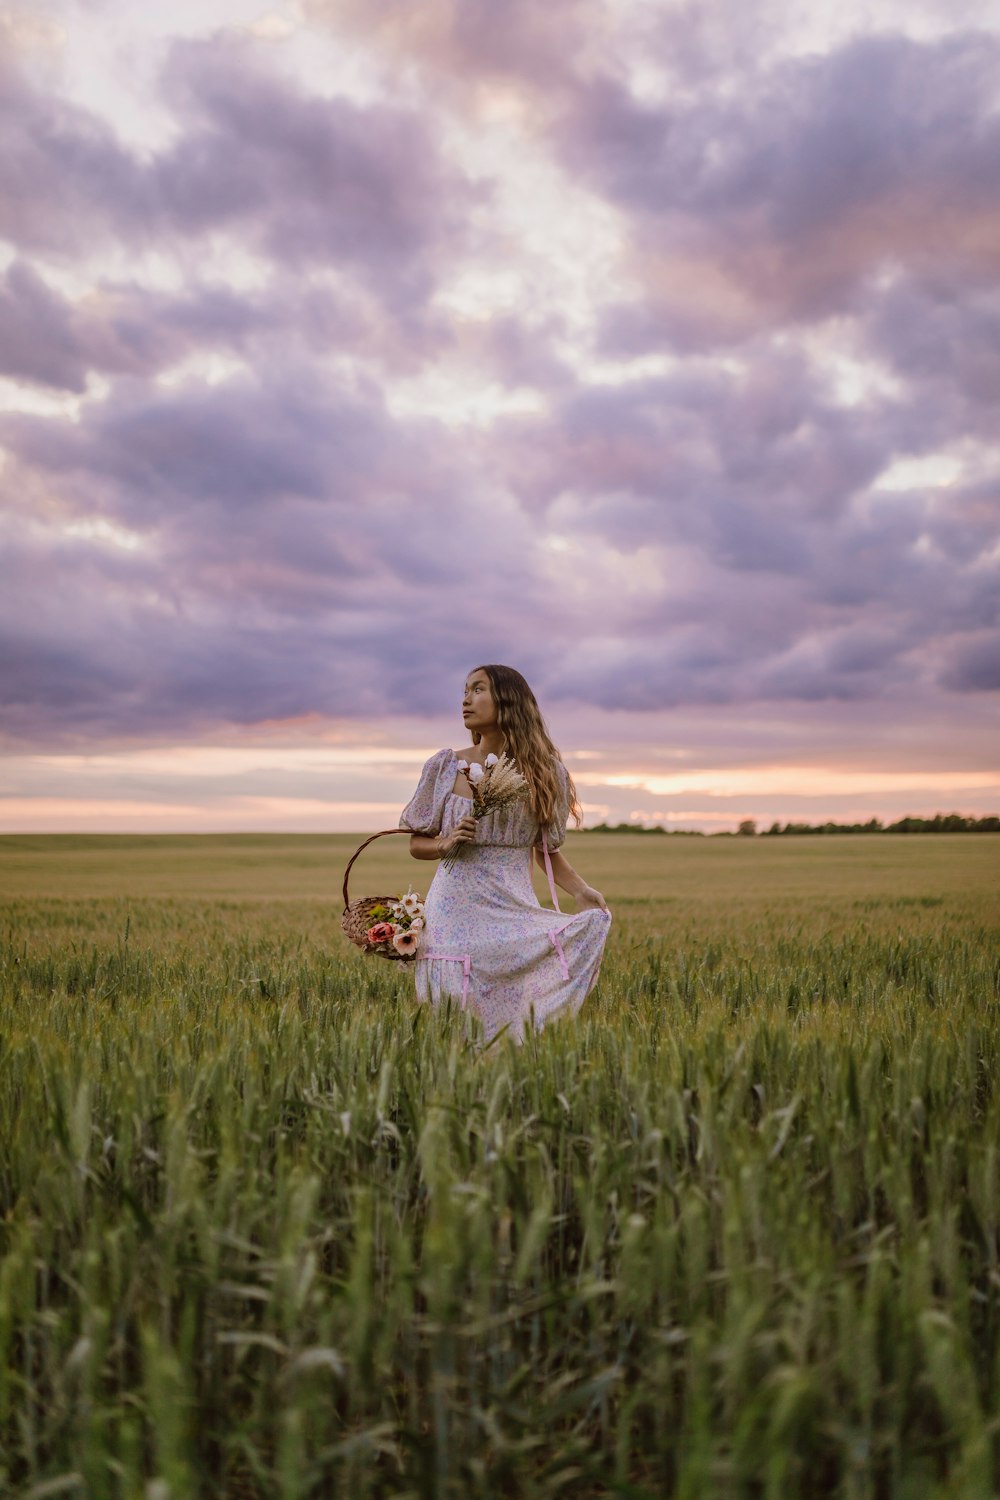 woman in white dress sitting on green grass field under cloudy sky during daytime